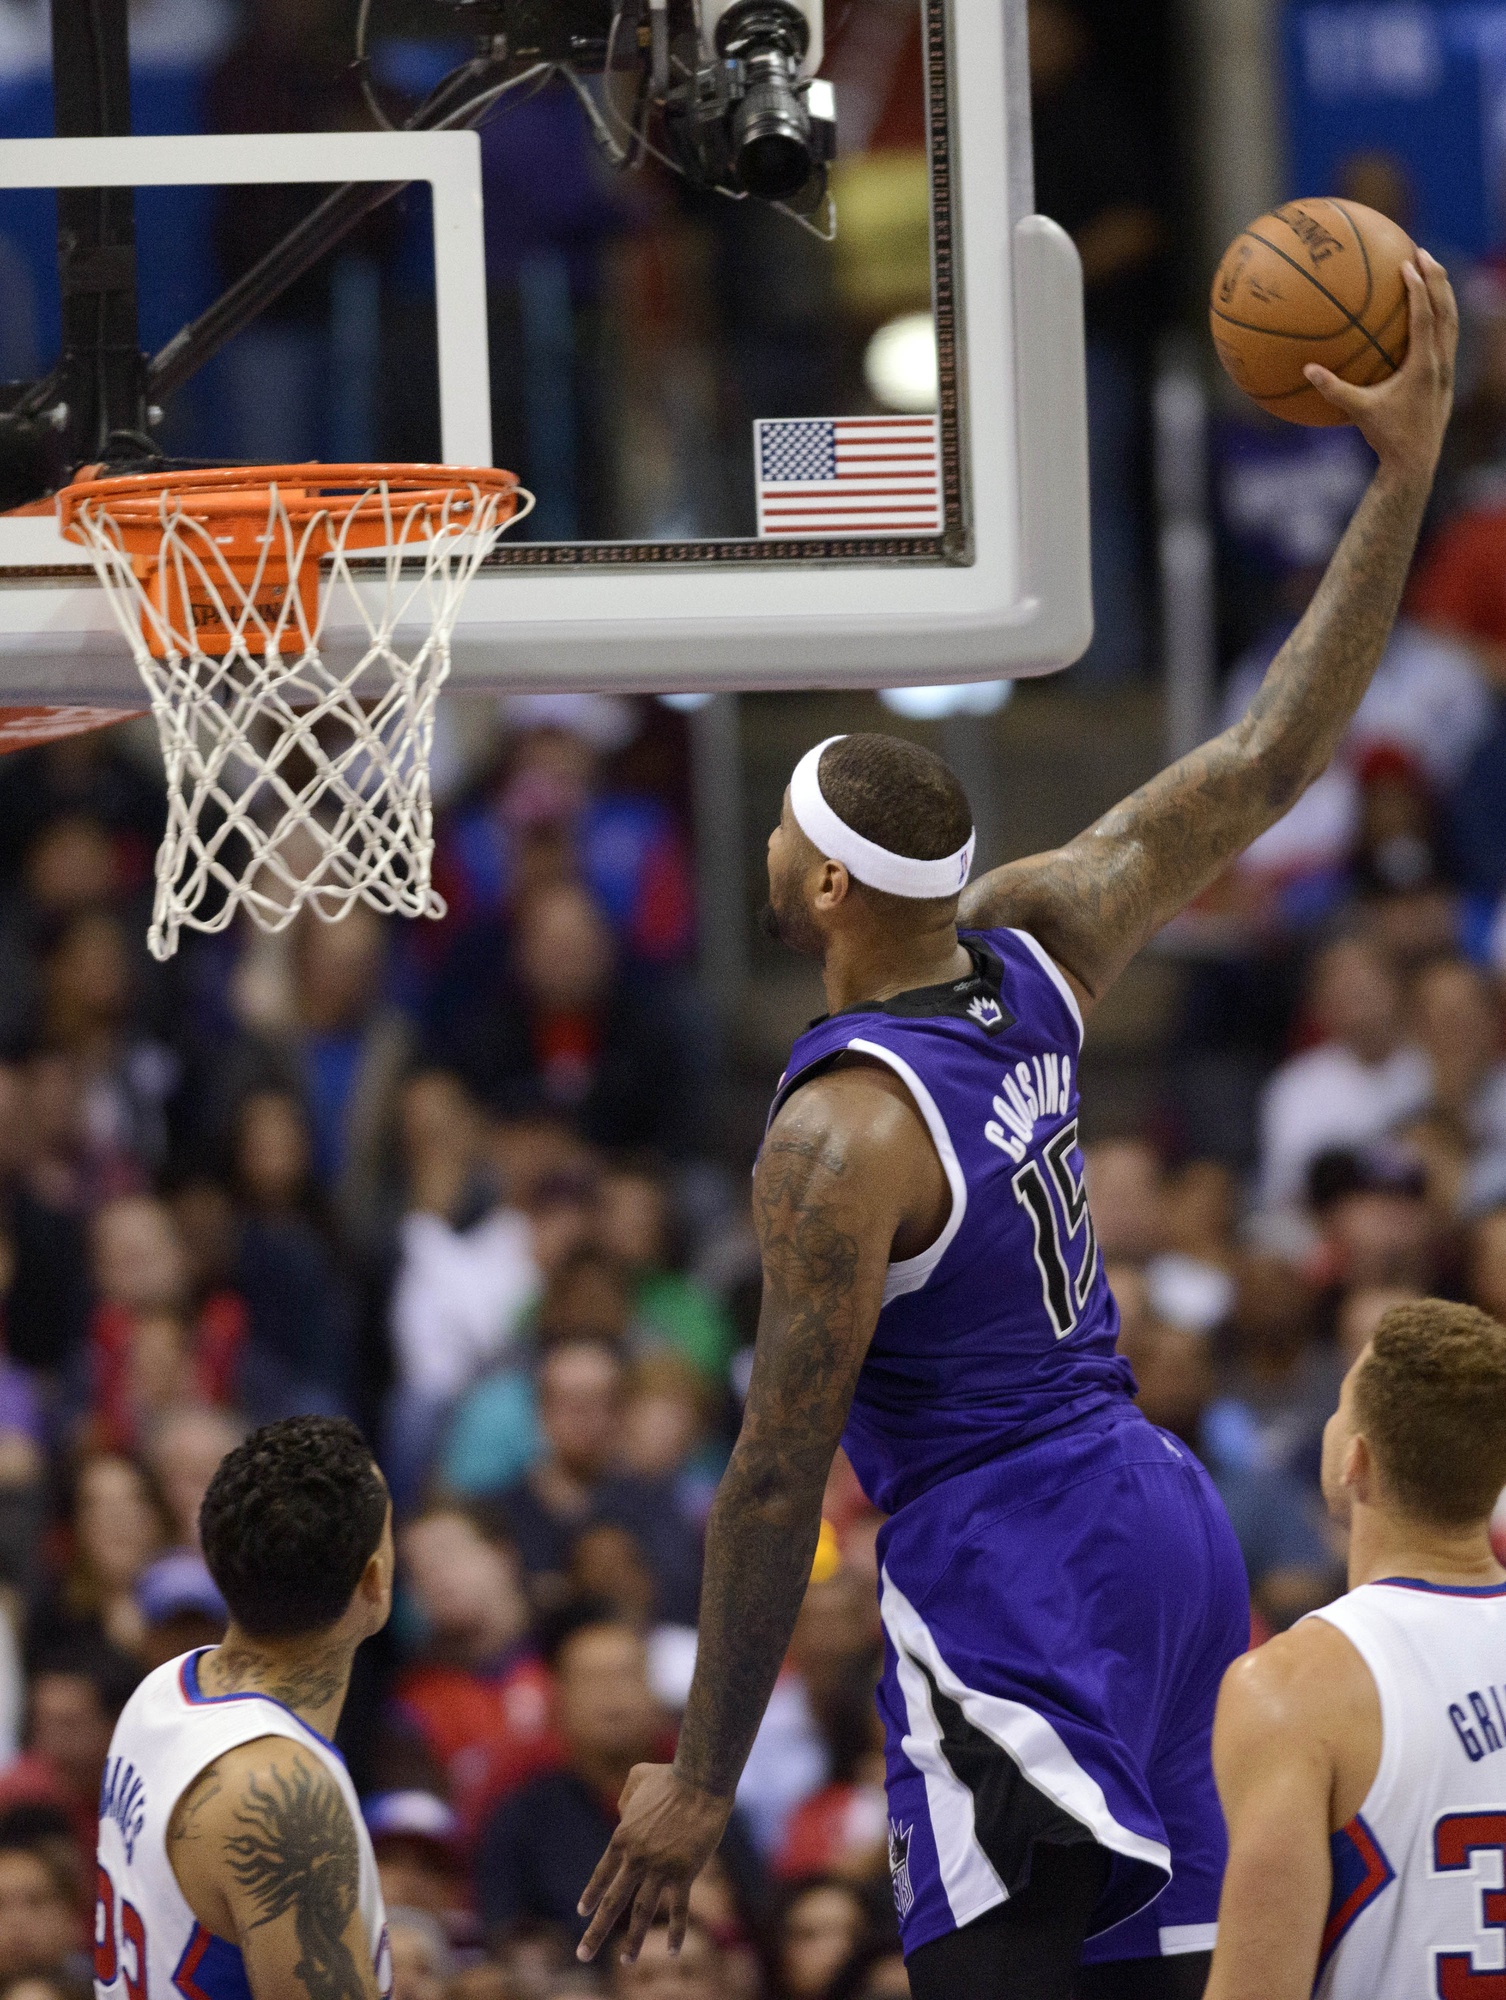 Can Boogie make the Al;-NBA Team? Photo via Kelvin Kuo, USA Today Sports Images